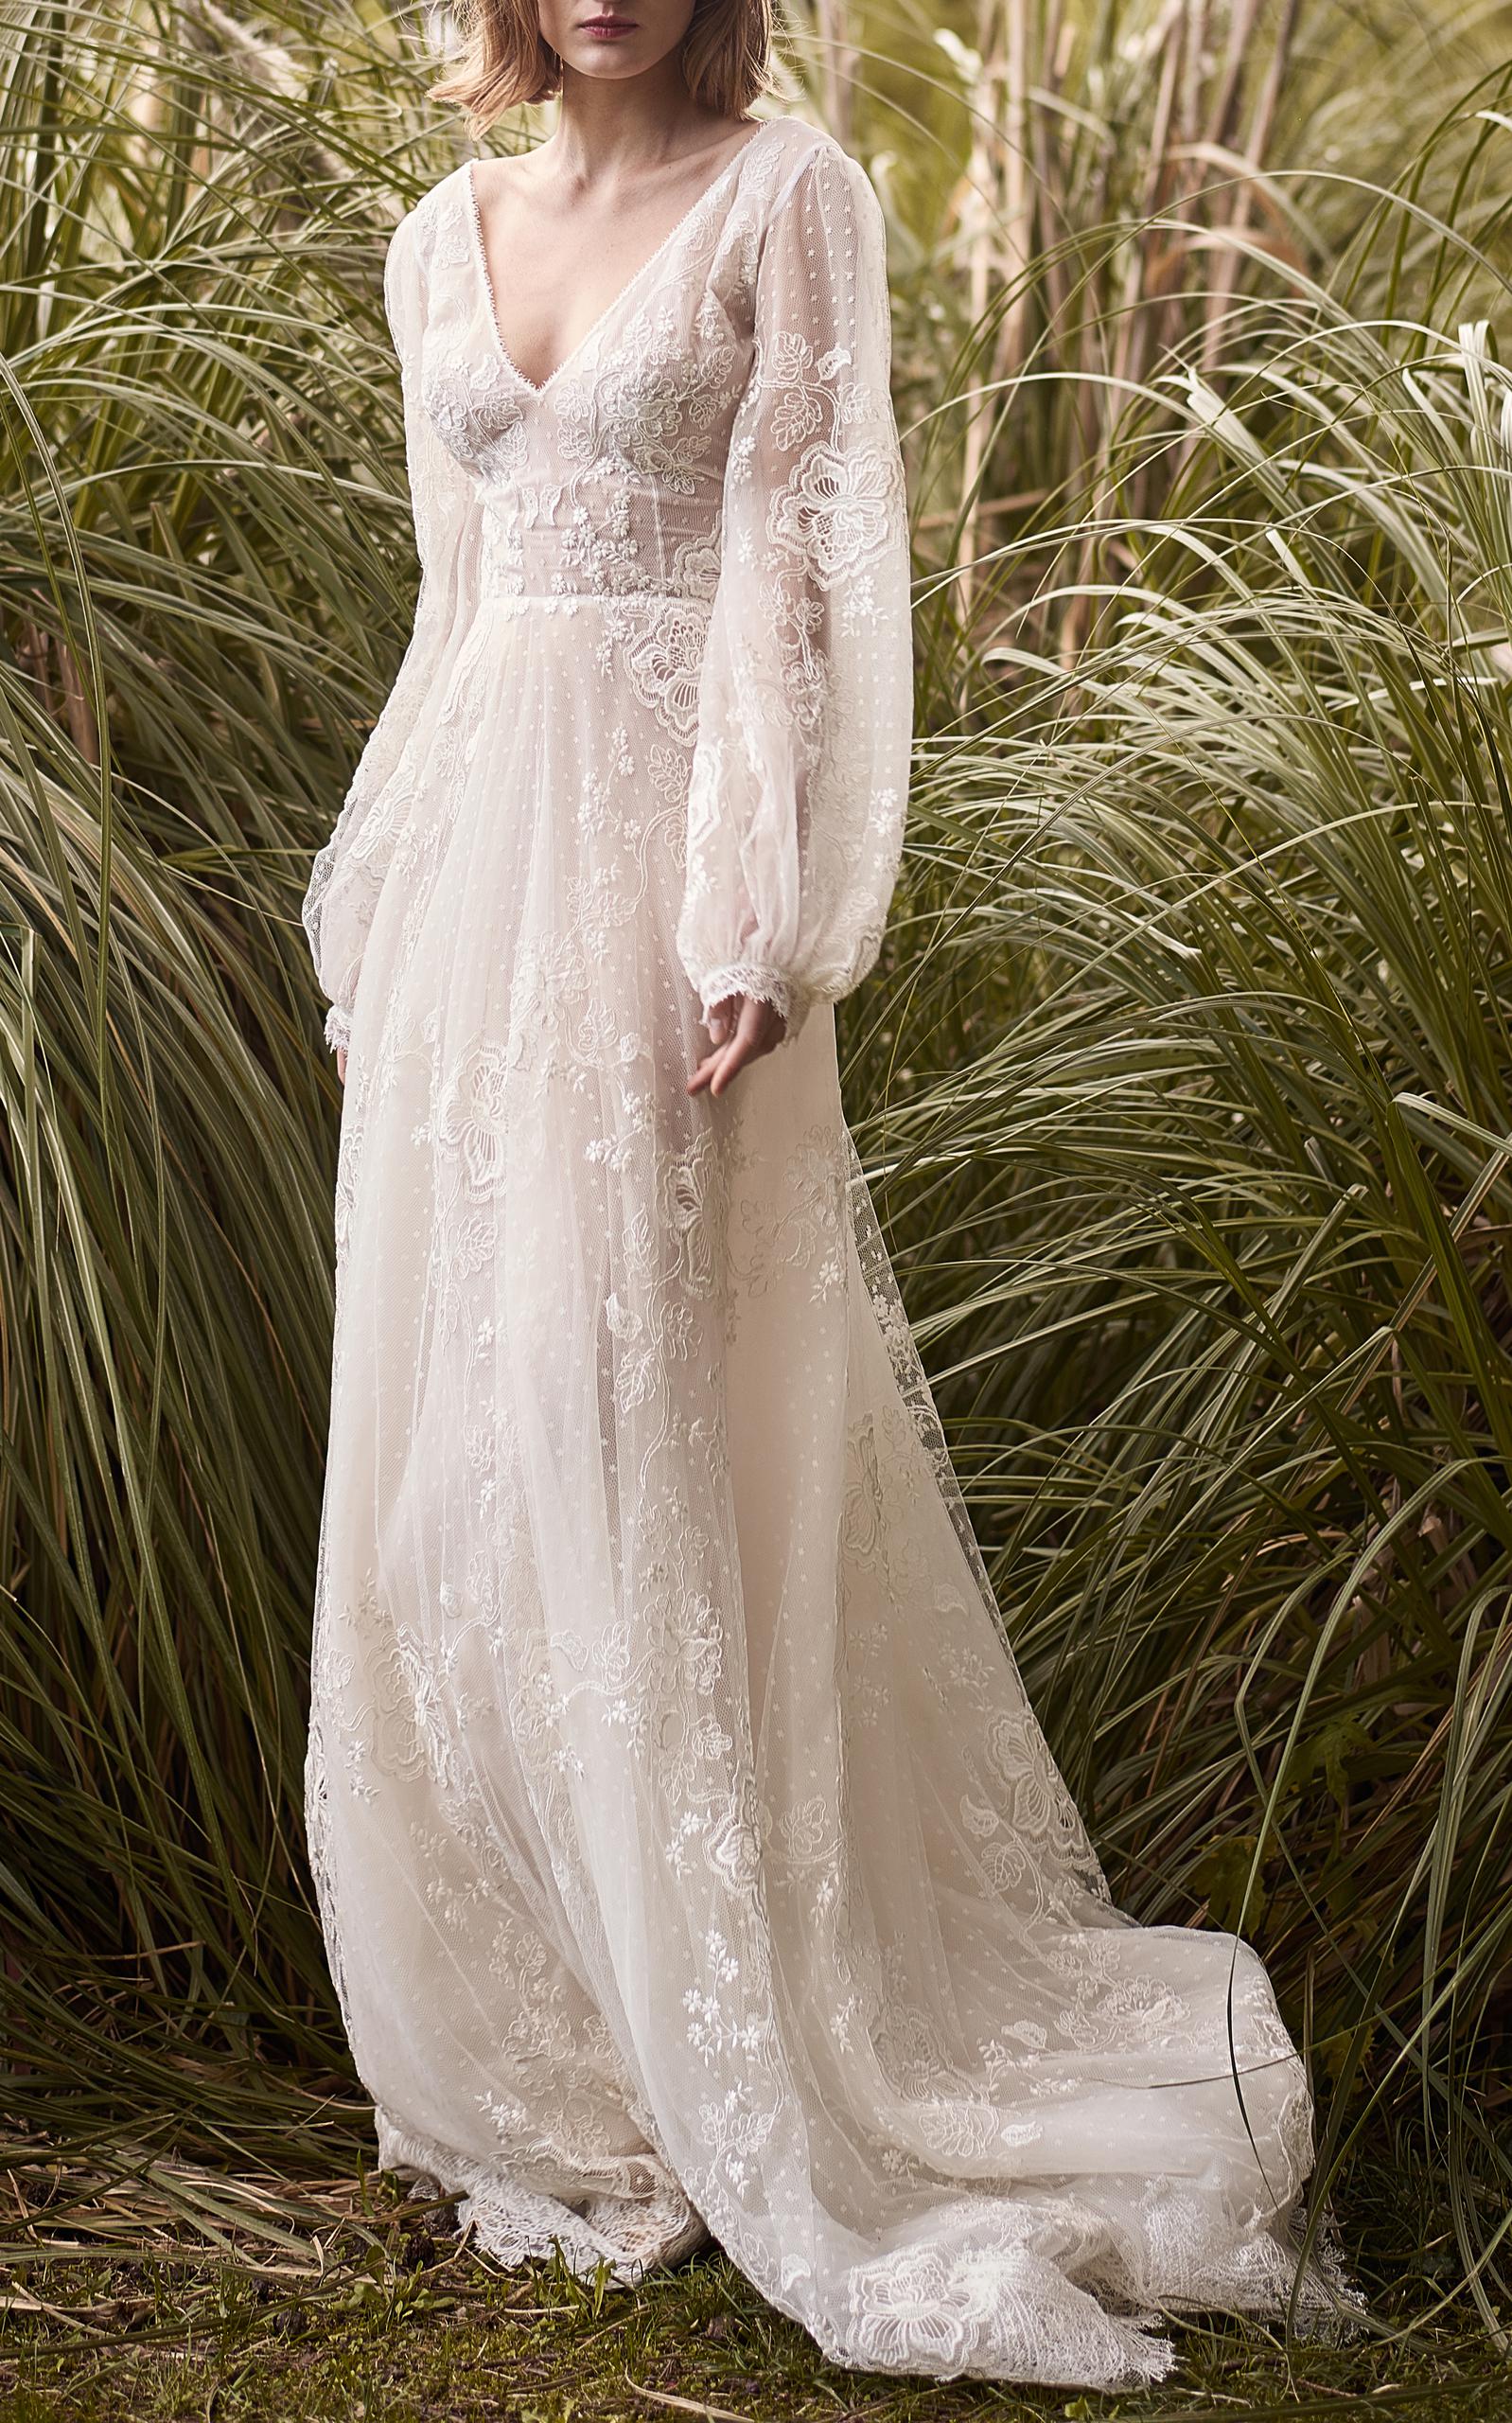 Lyst Costarellos Bridal Embroidered Lace Ethereal Gown In White 9340